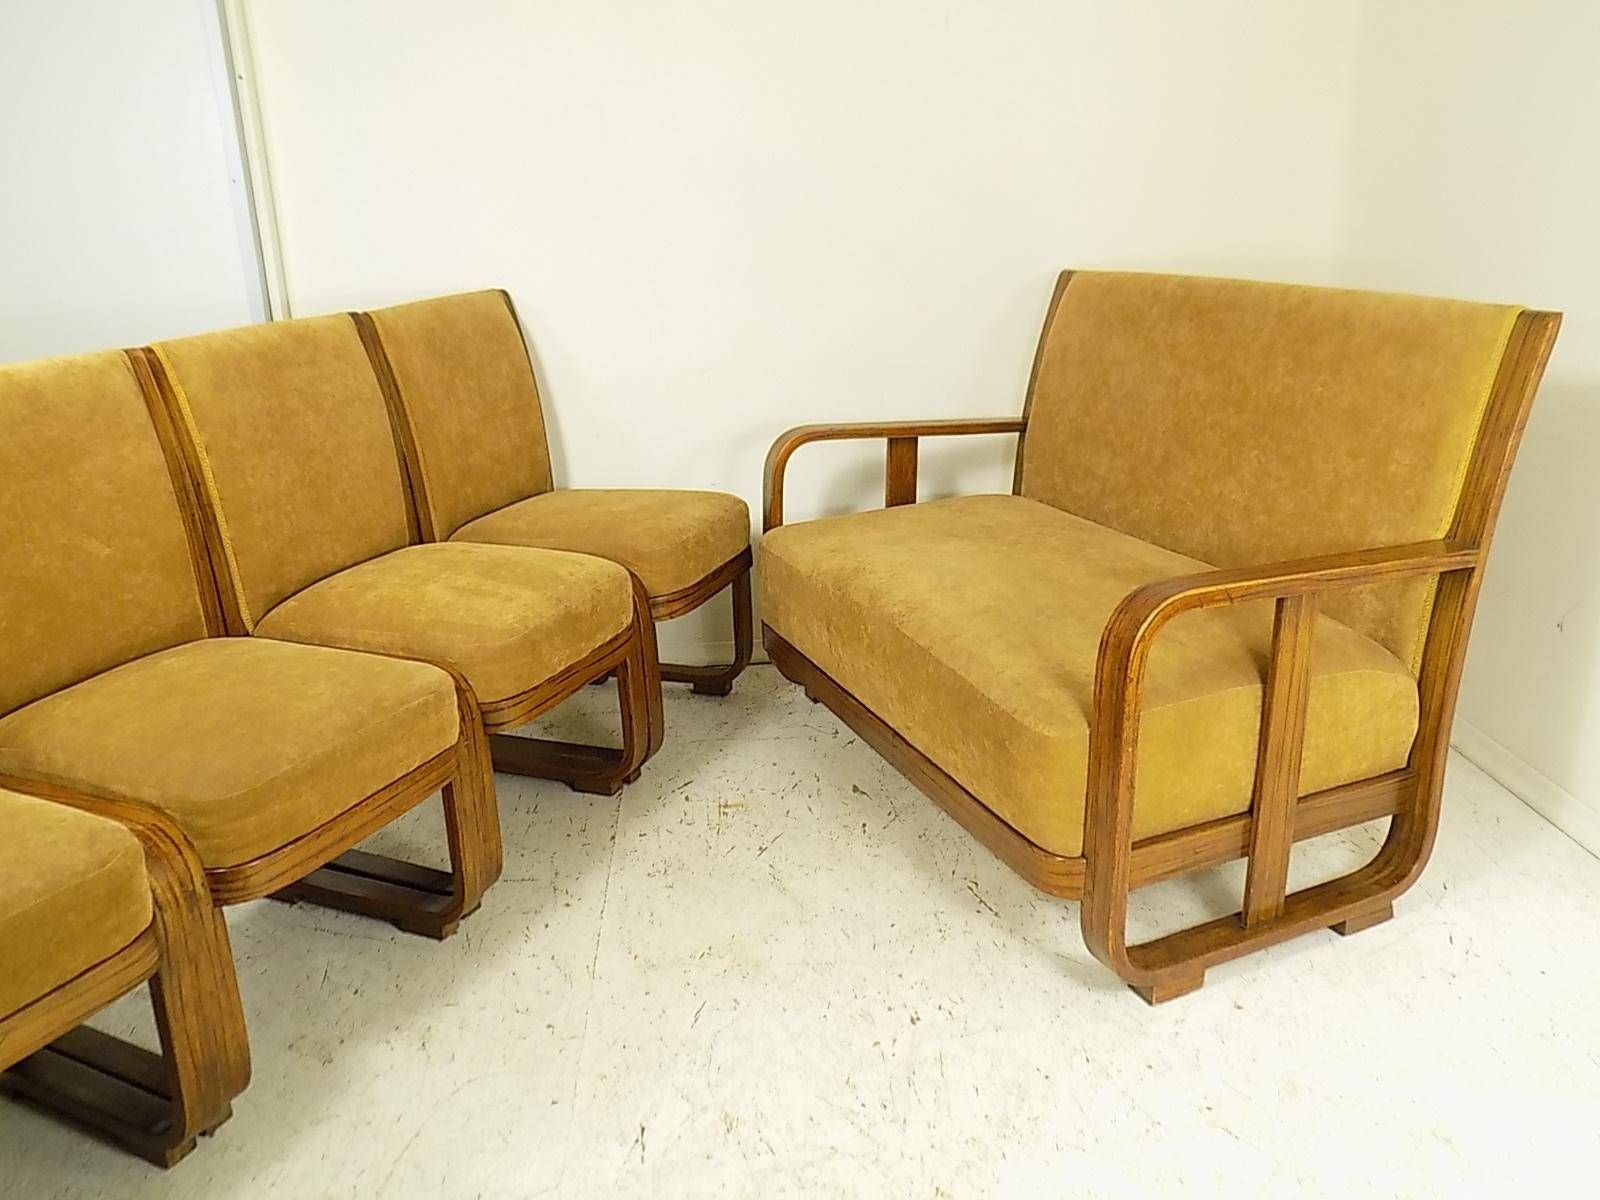 4 Chairs And Sofastefan Sienicki For Thonet, 1930s For Sale At Regarding 1930s Couch (Photo 187 of 299)